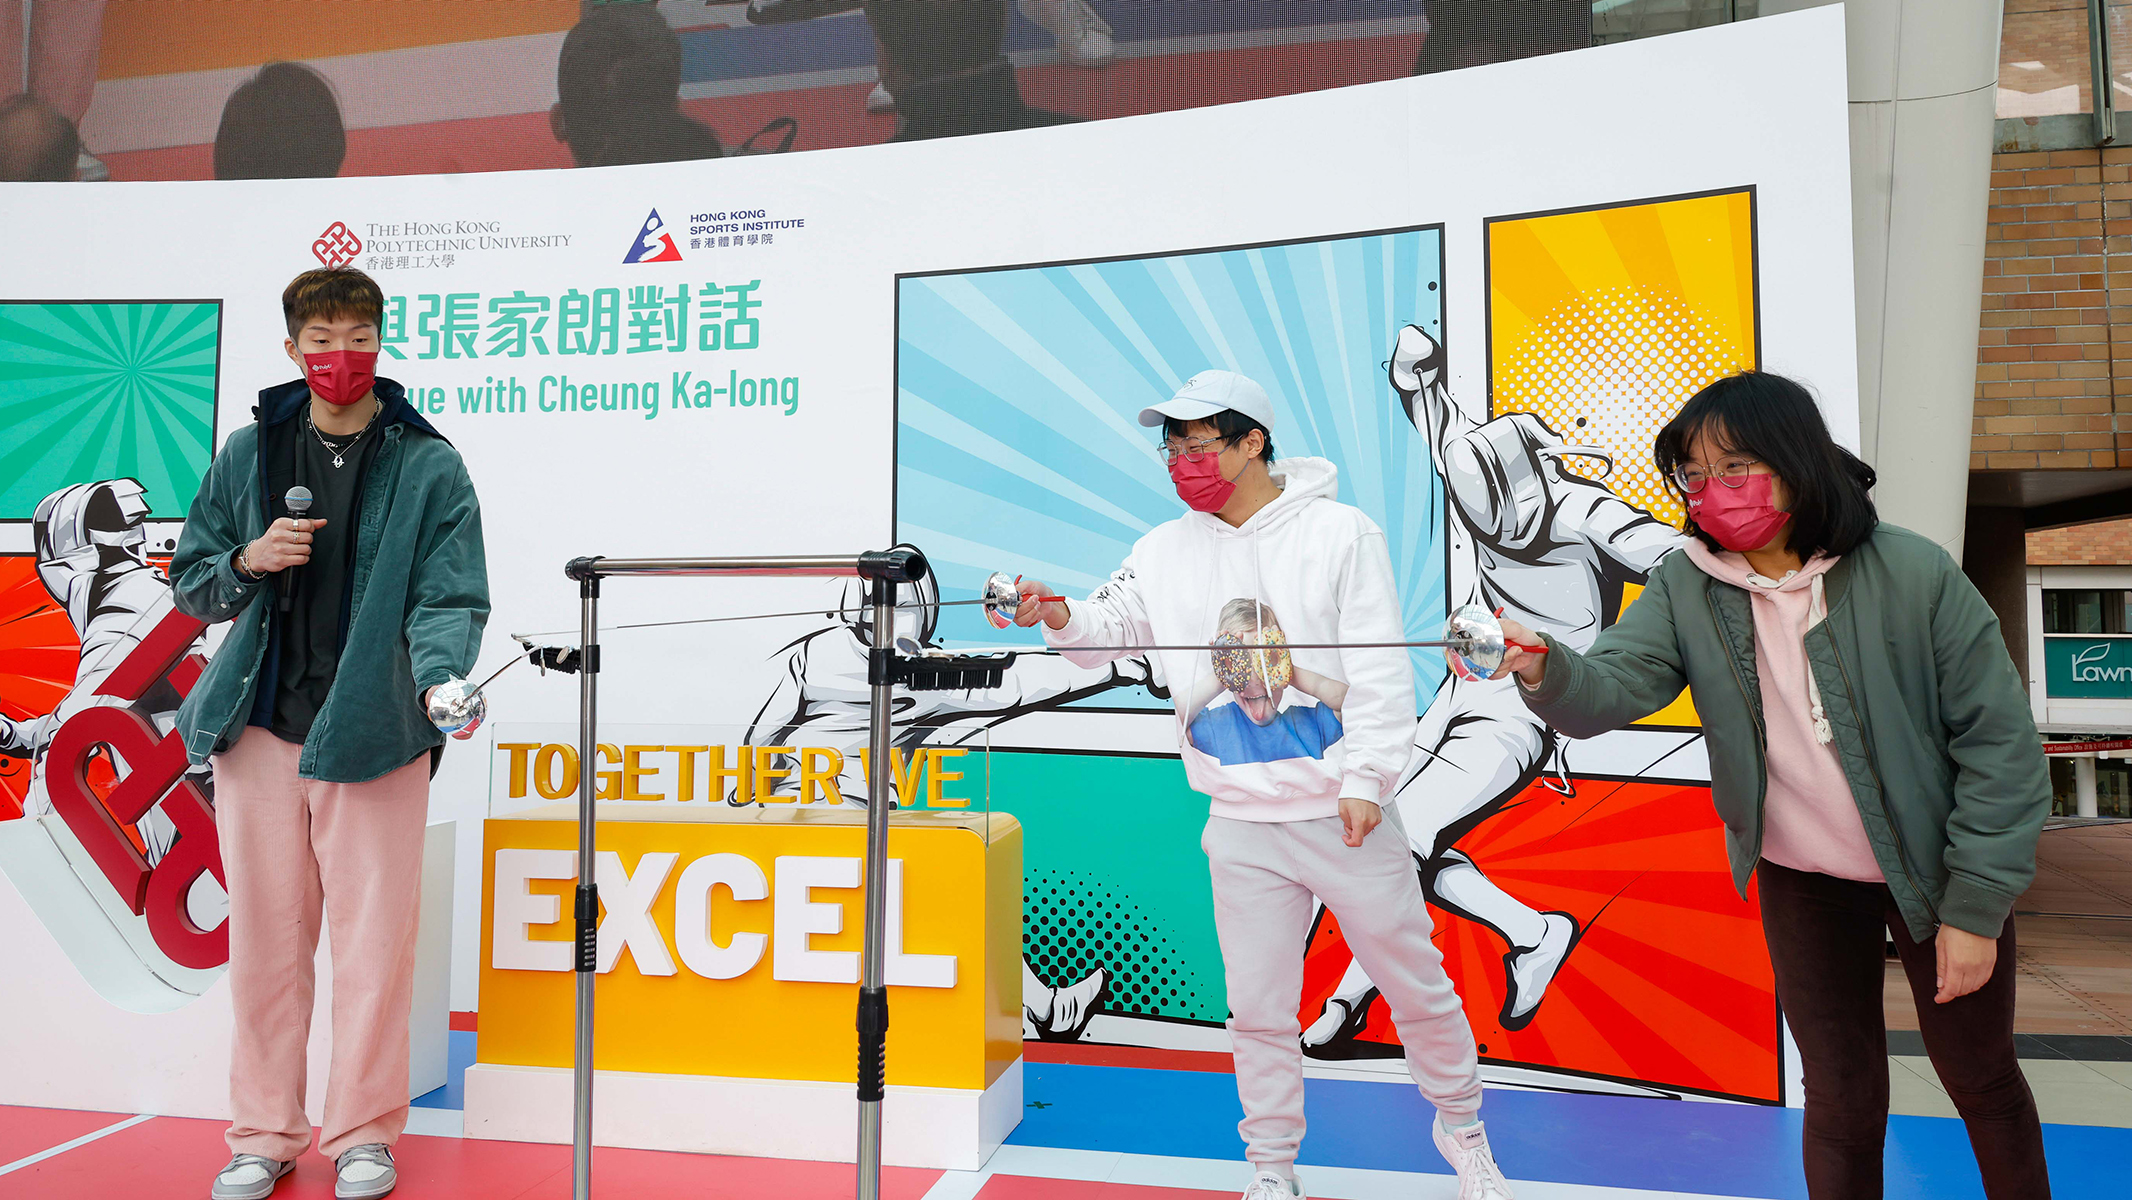 receive instruction on basic fencing skills from Ka-long